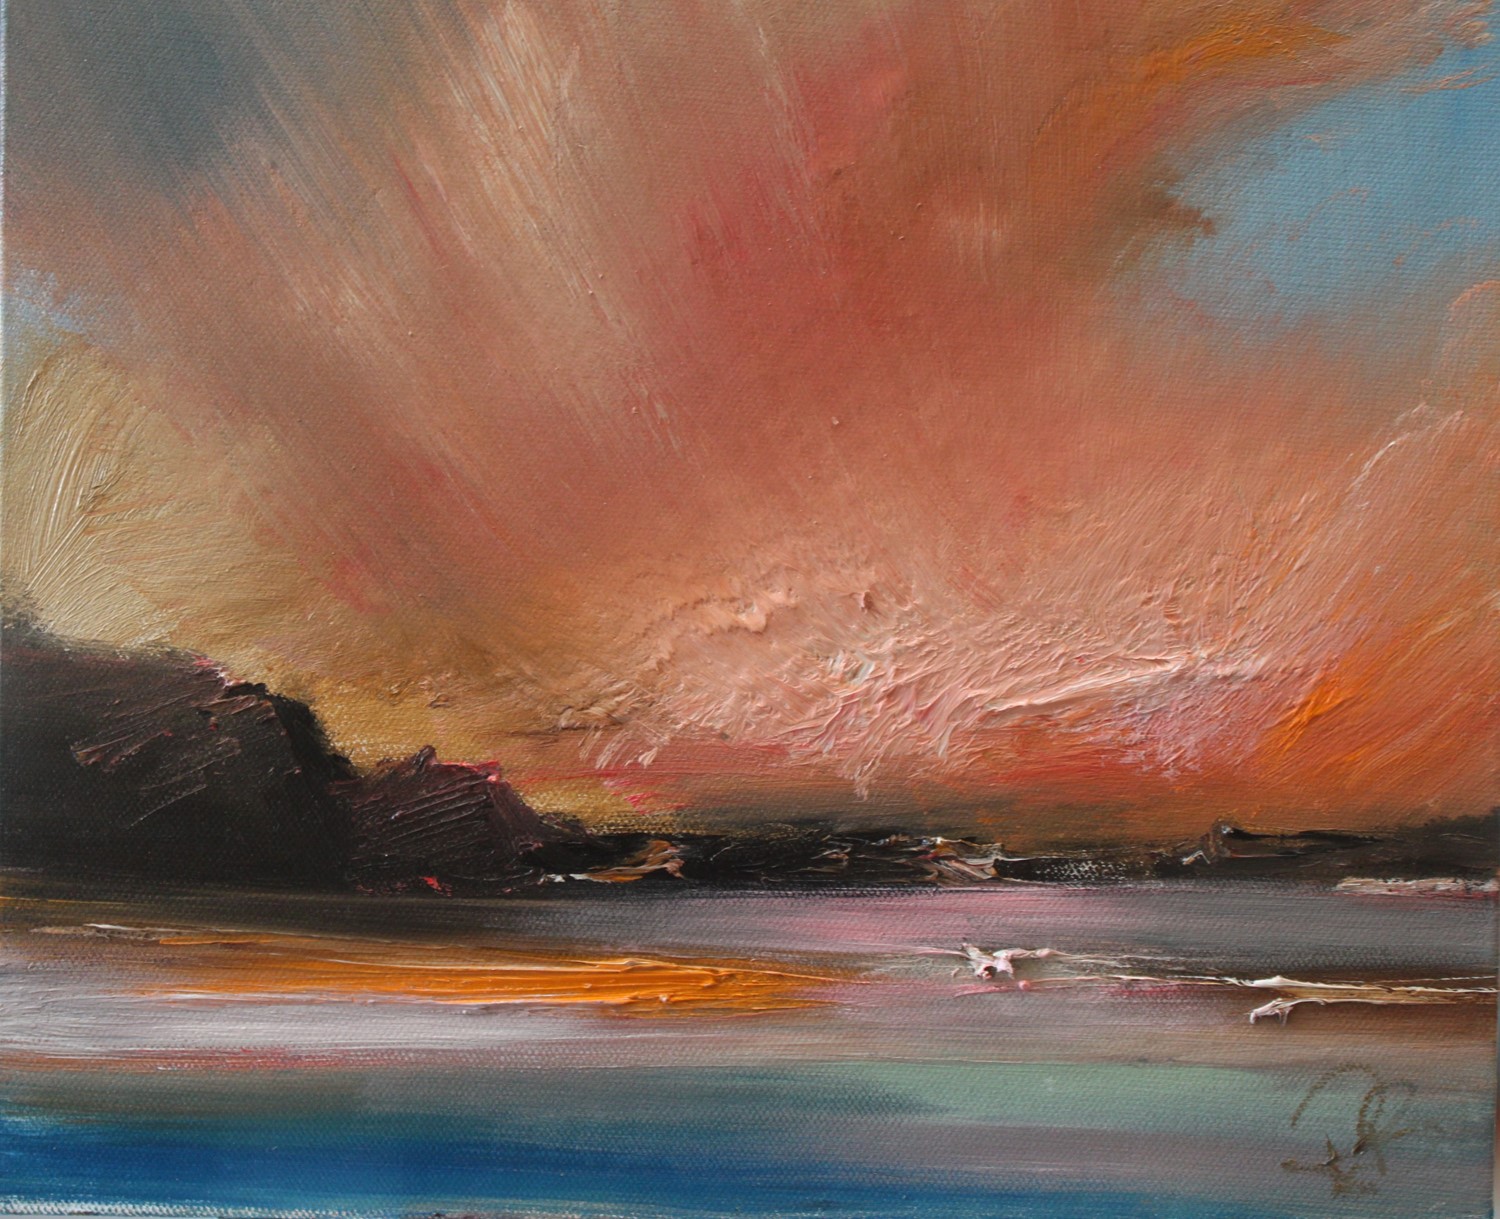 'Isles at sunset' by artist Rosanne Barr